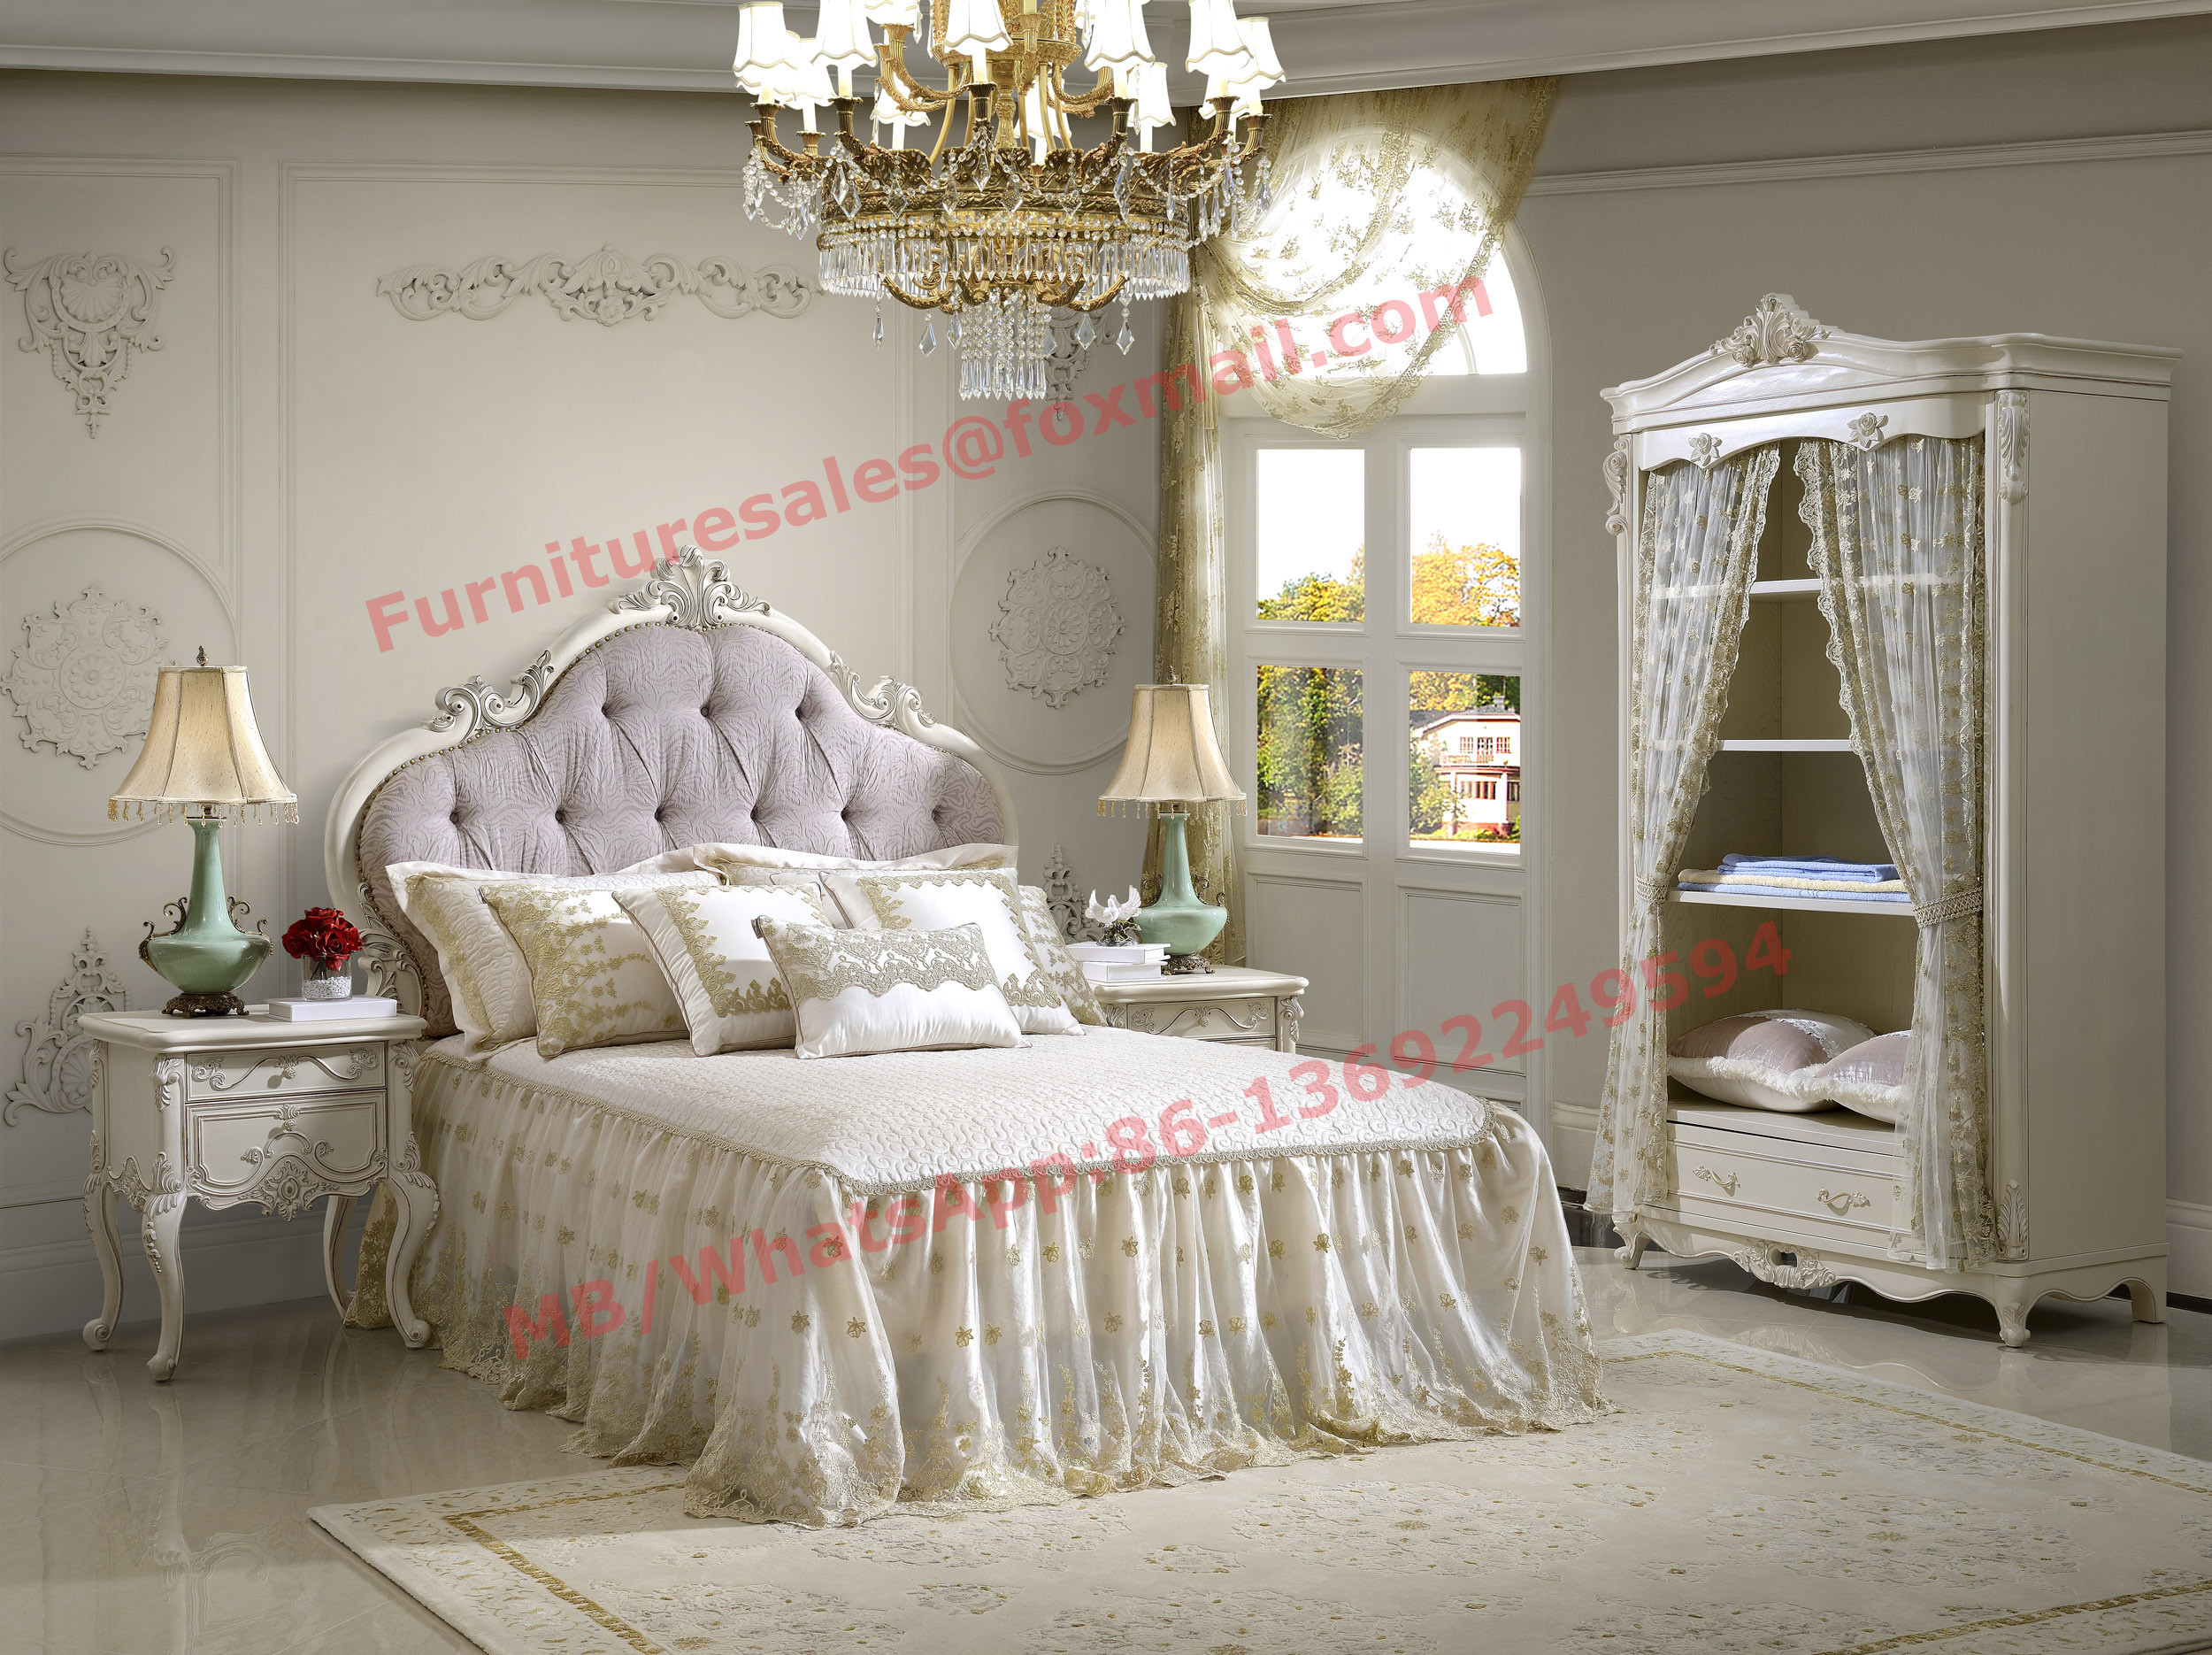 Best Exquisite Design and Workmanship for Lovely Girls Bedroom Furniture set in White Color wholesale